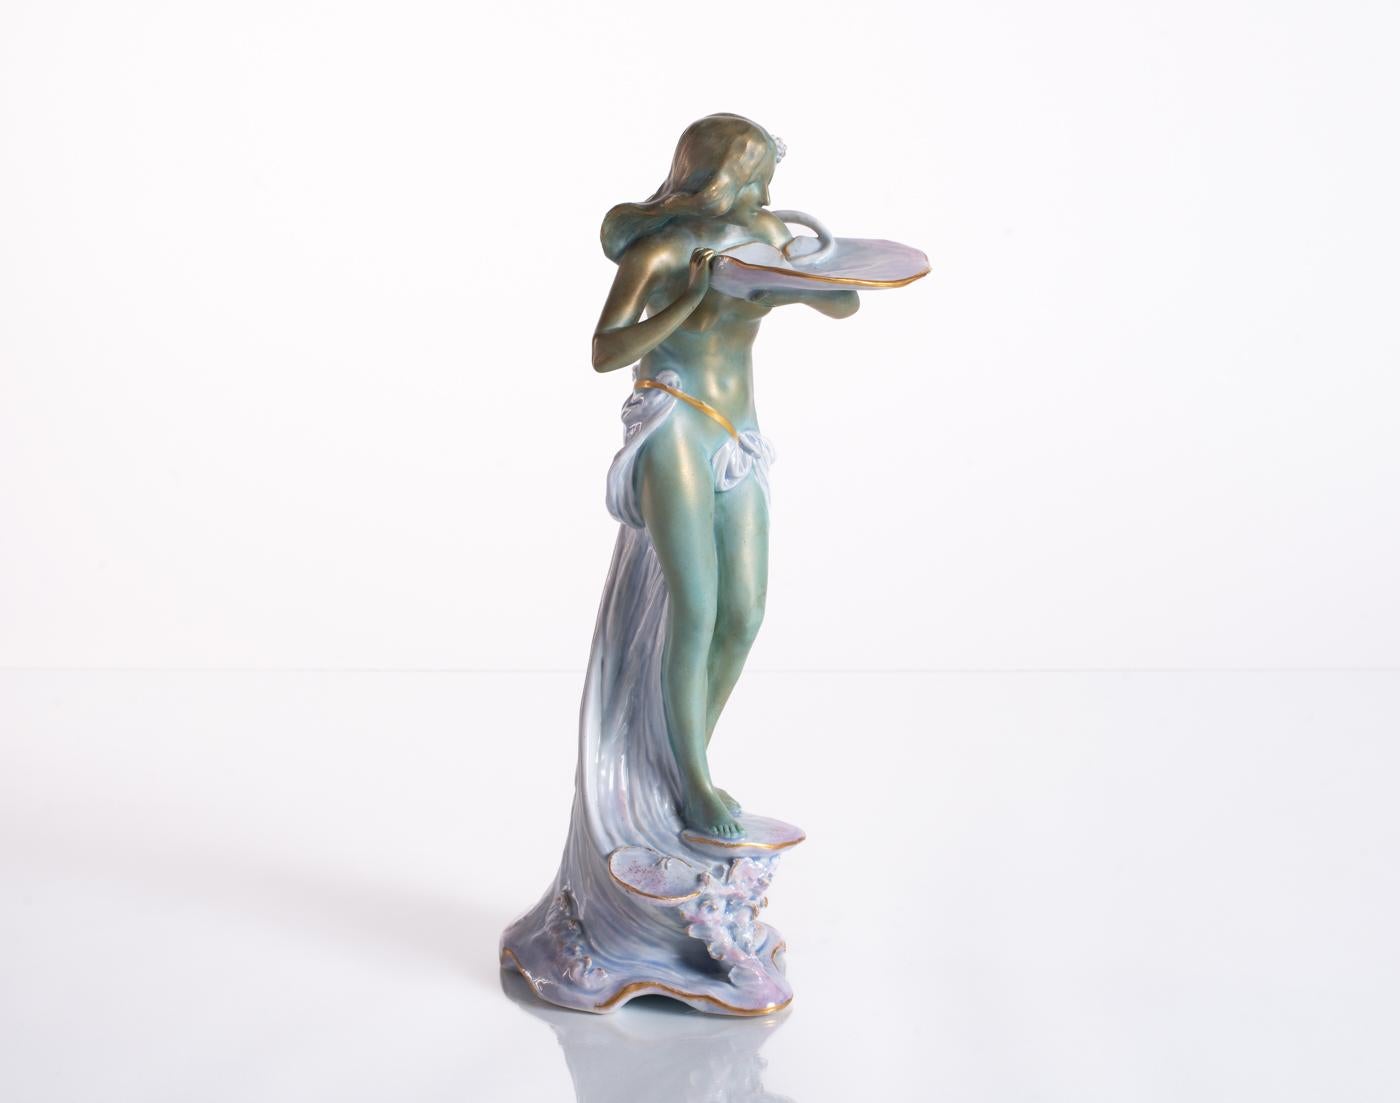 Standing atop a textured, frothy pastel sea, a classic green Art Nouveau maiden stands cradled by figural waves with an offering of a lily pad. An excellent example of the "ivory porcelain" ceramic material being used by producers in the